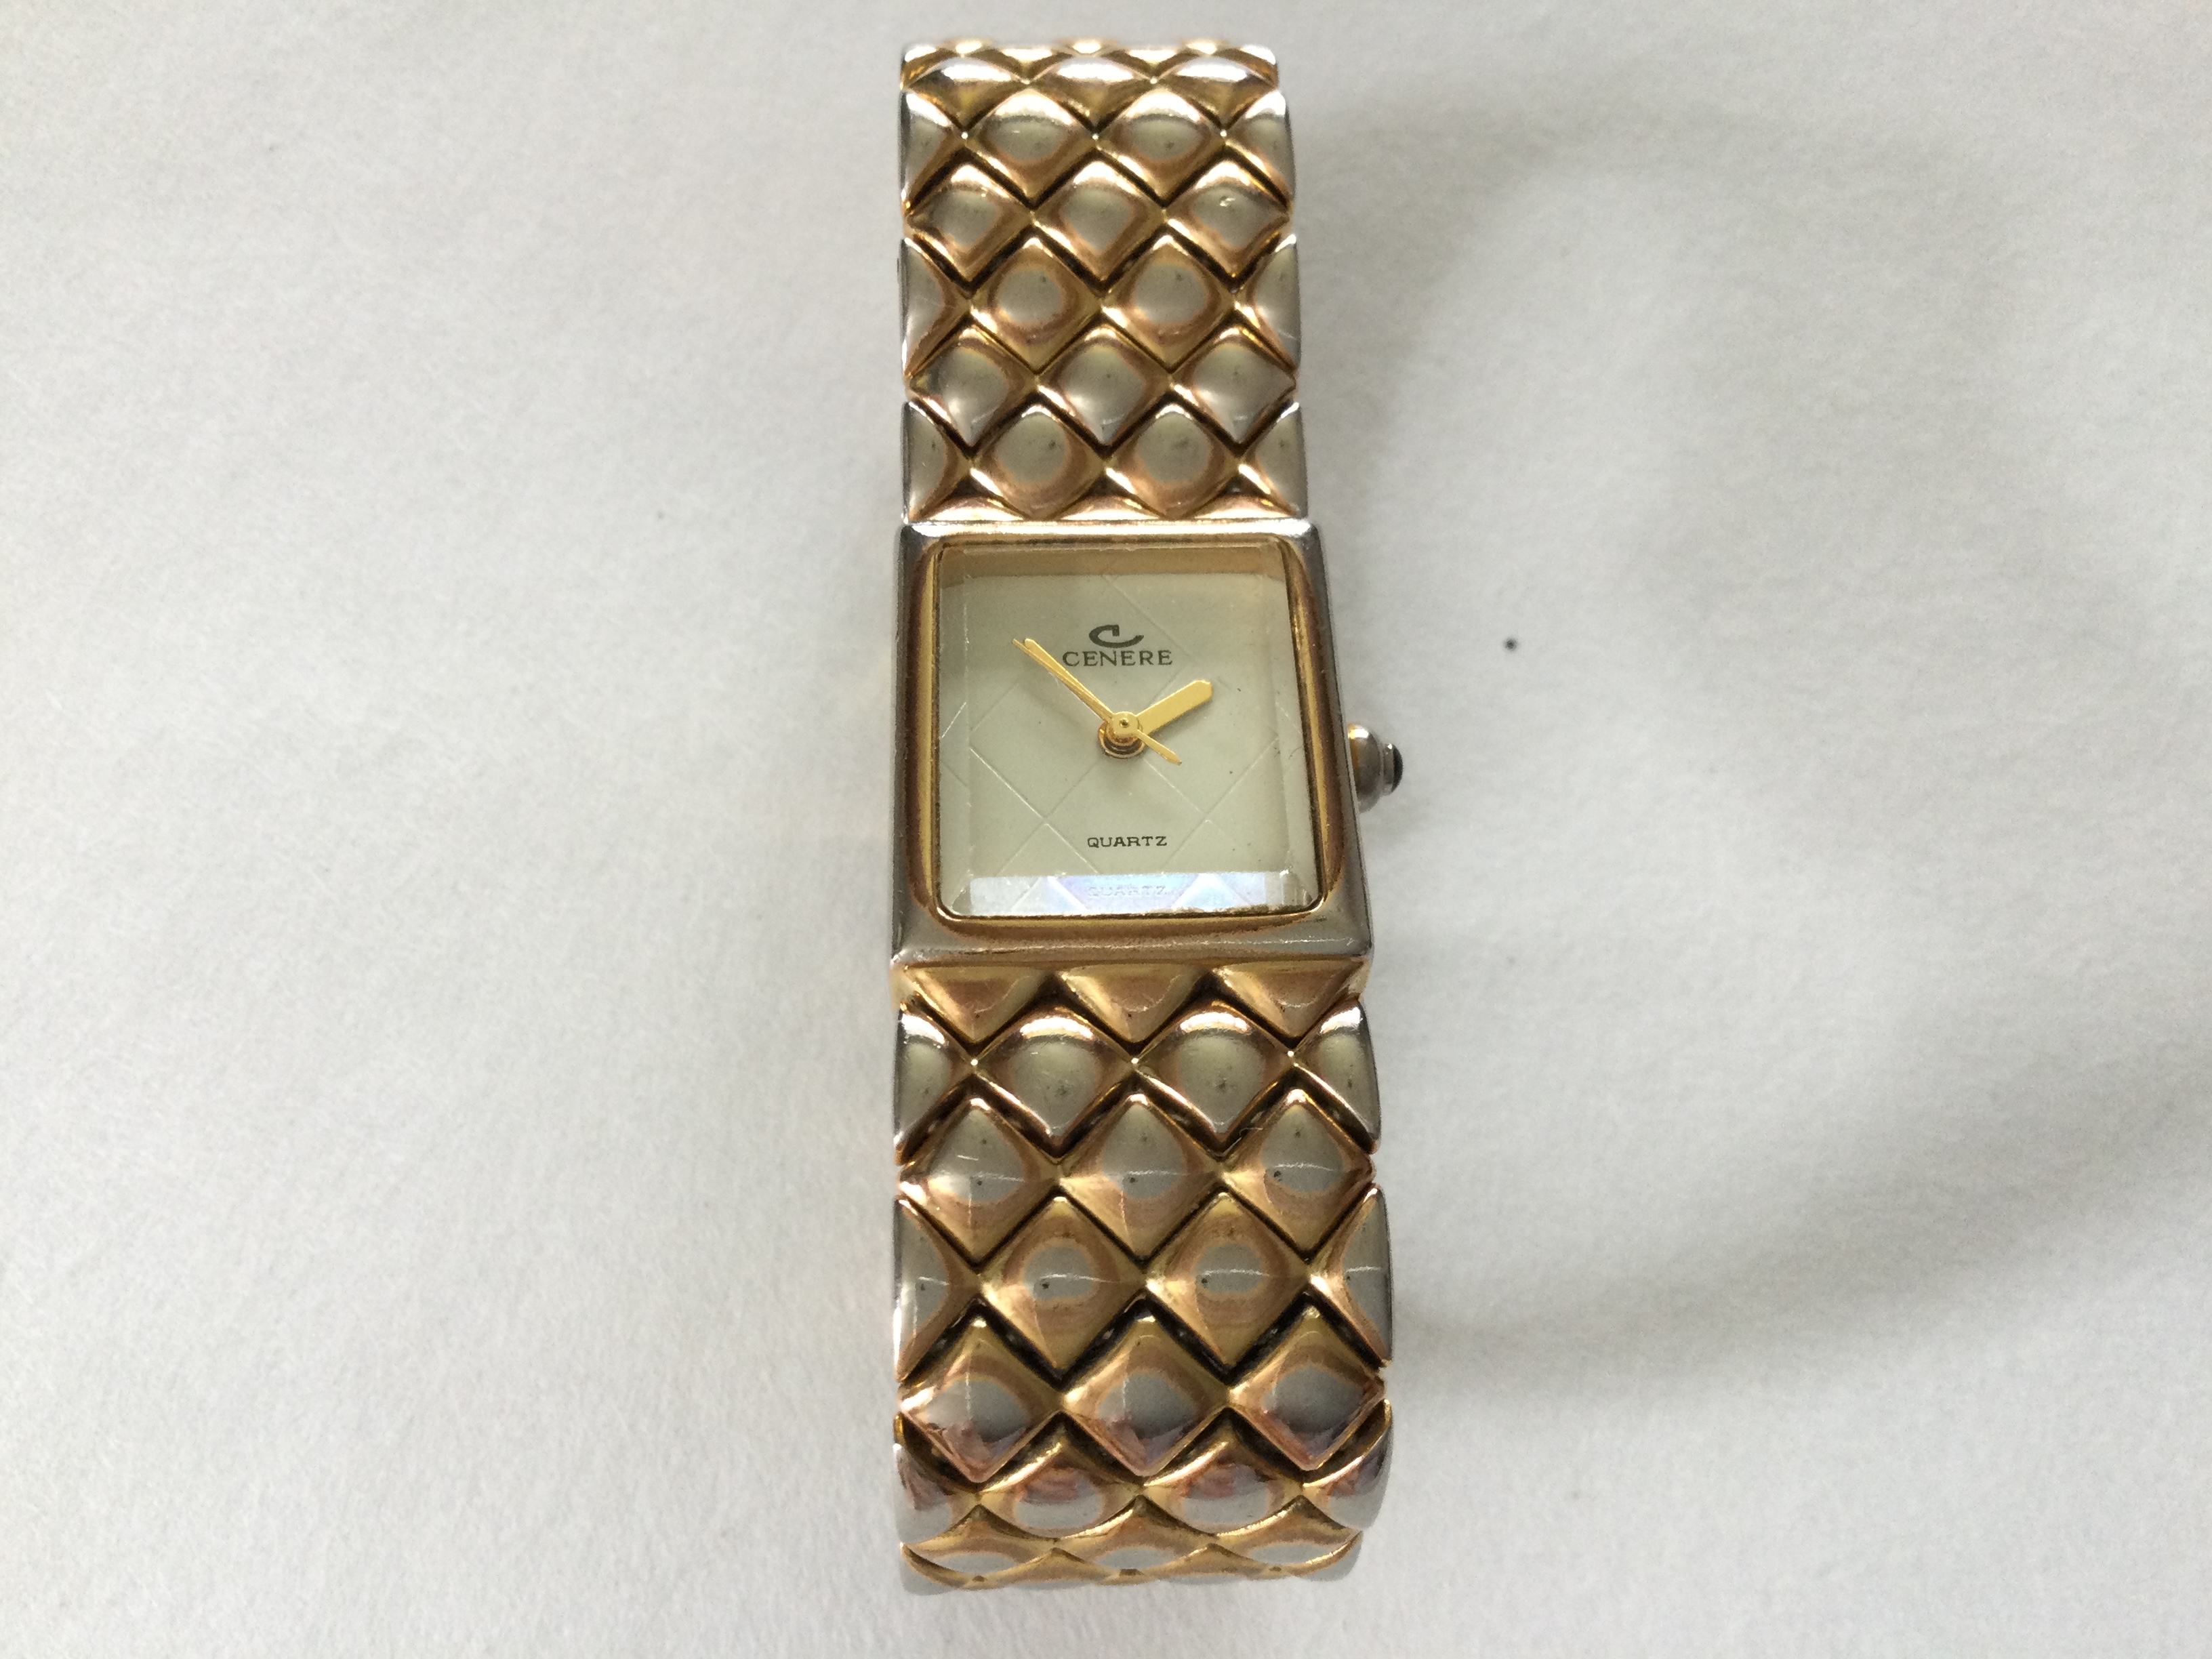 Ladies Cenere 545 Gold Plated Wristwatch (Gs6) A beautiful little Cenere 545 Gold Plated